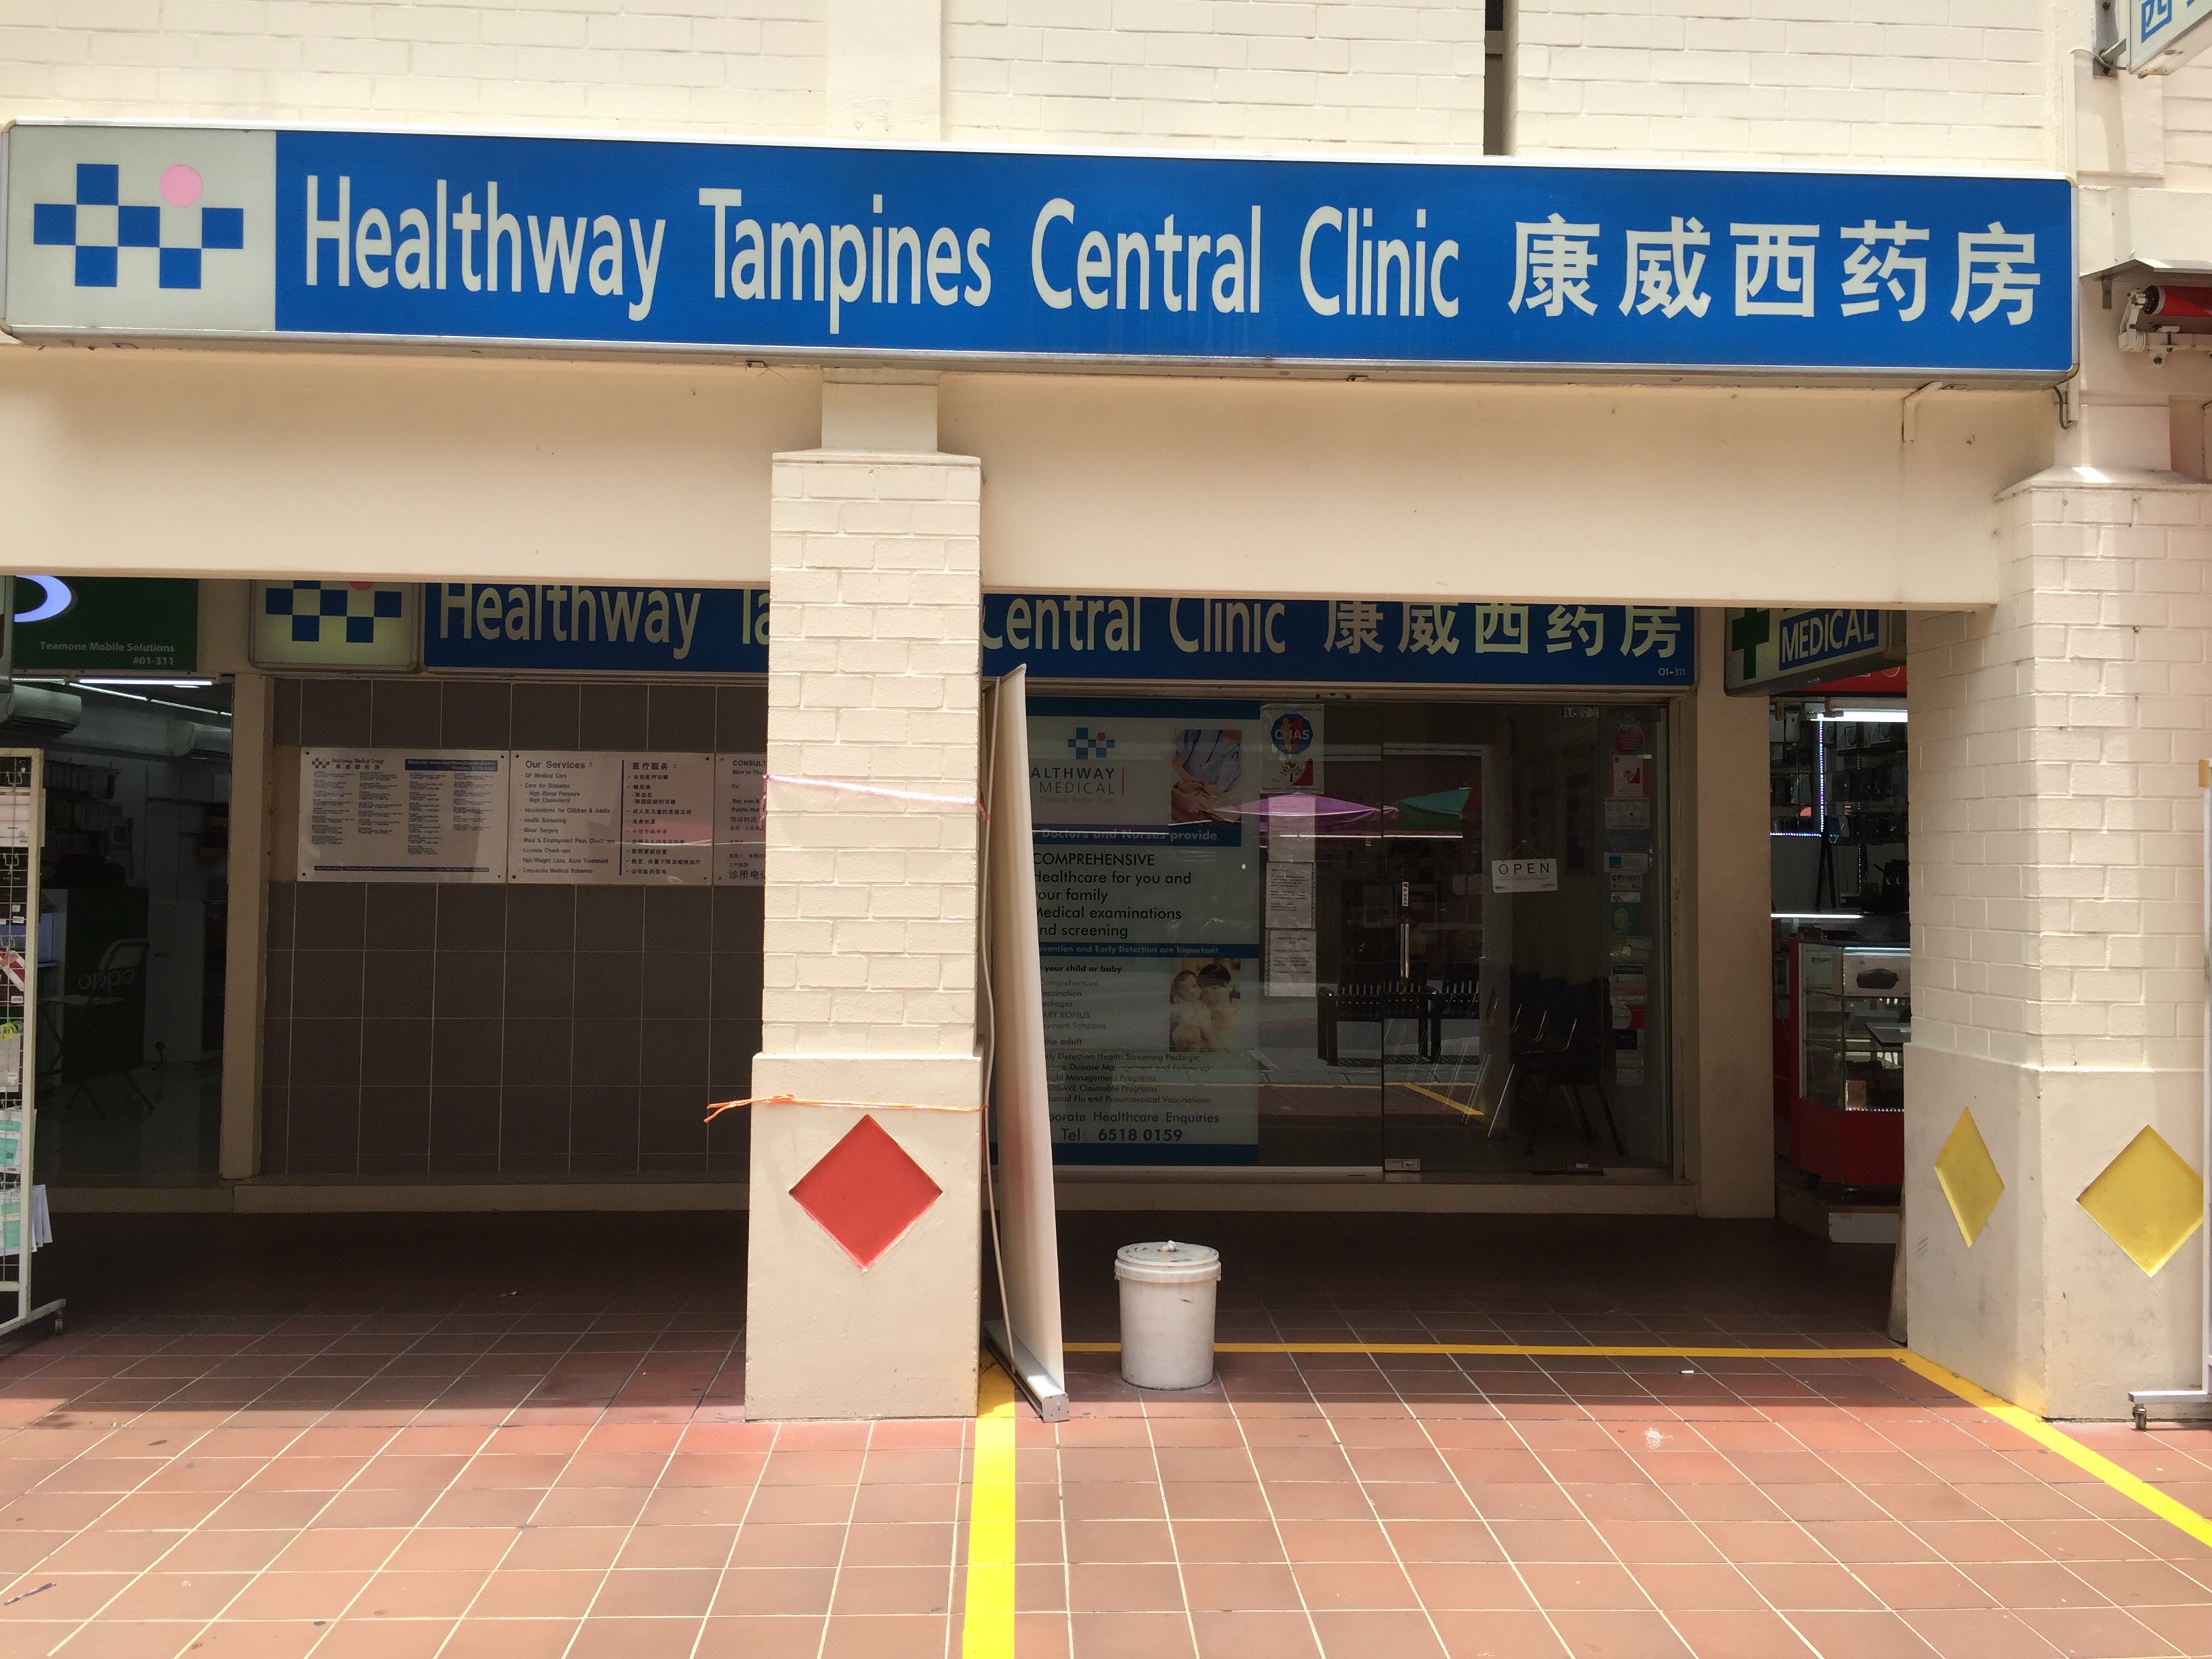 Singapore Service Medical Clinic Healthway Tampines Central Clinic Nestia